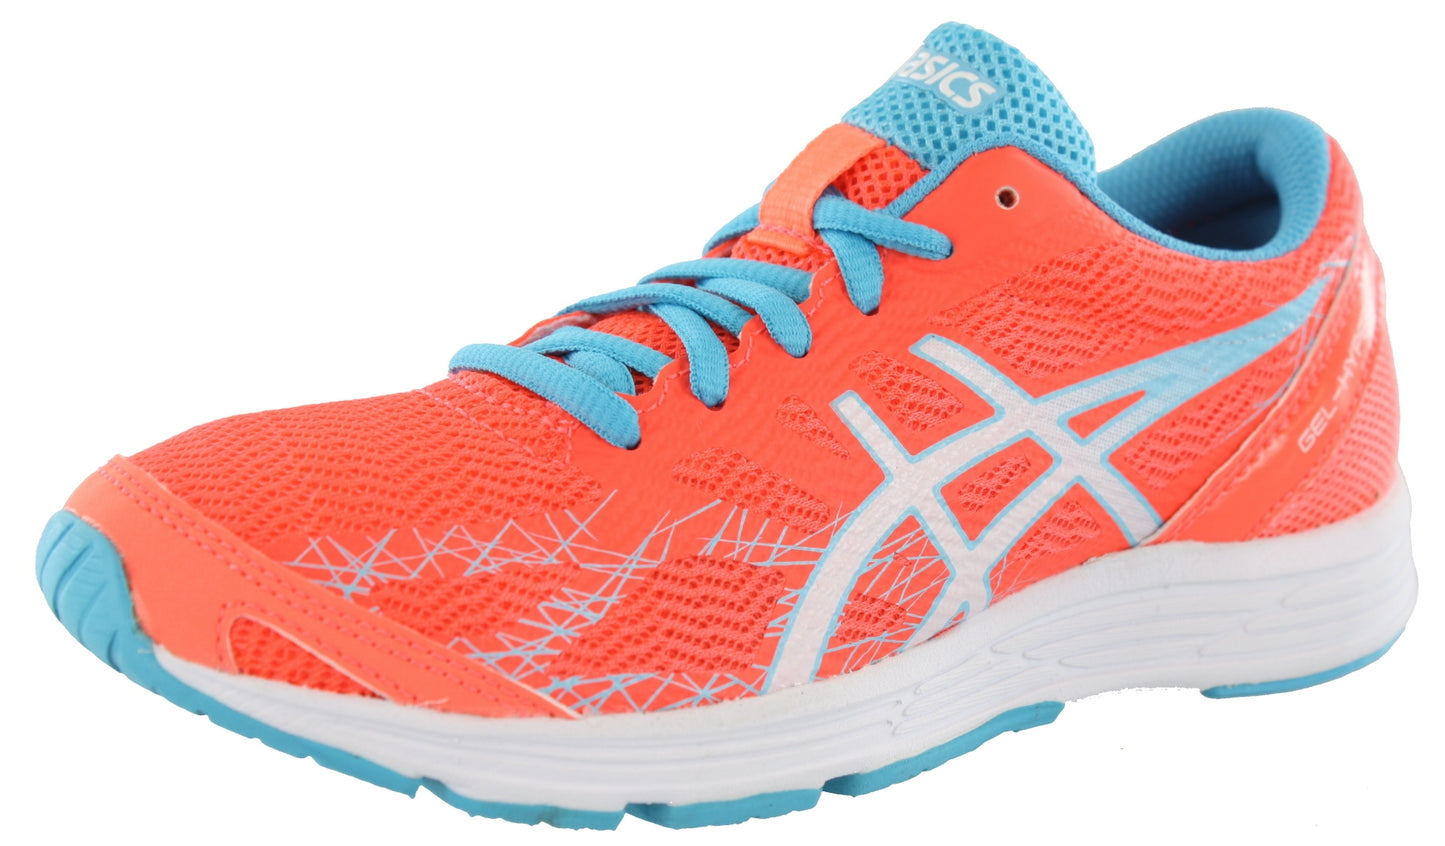 Lateral of FlCoral/White/Turqoise ASICS Women Walking Cushioned Running Shoes Gel Hyper Speed 7